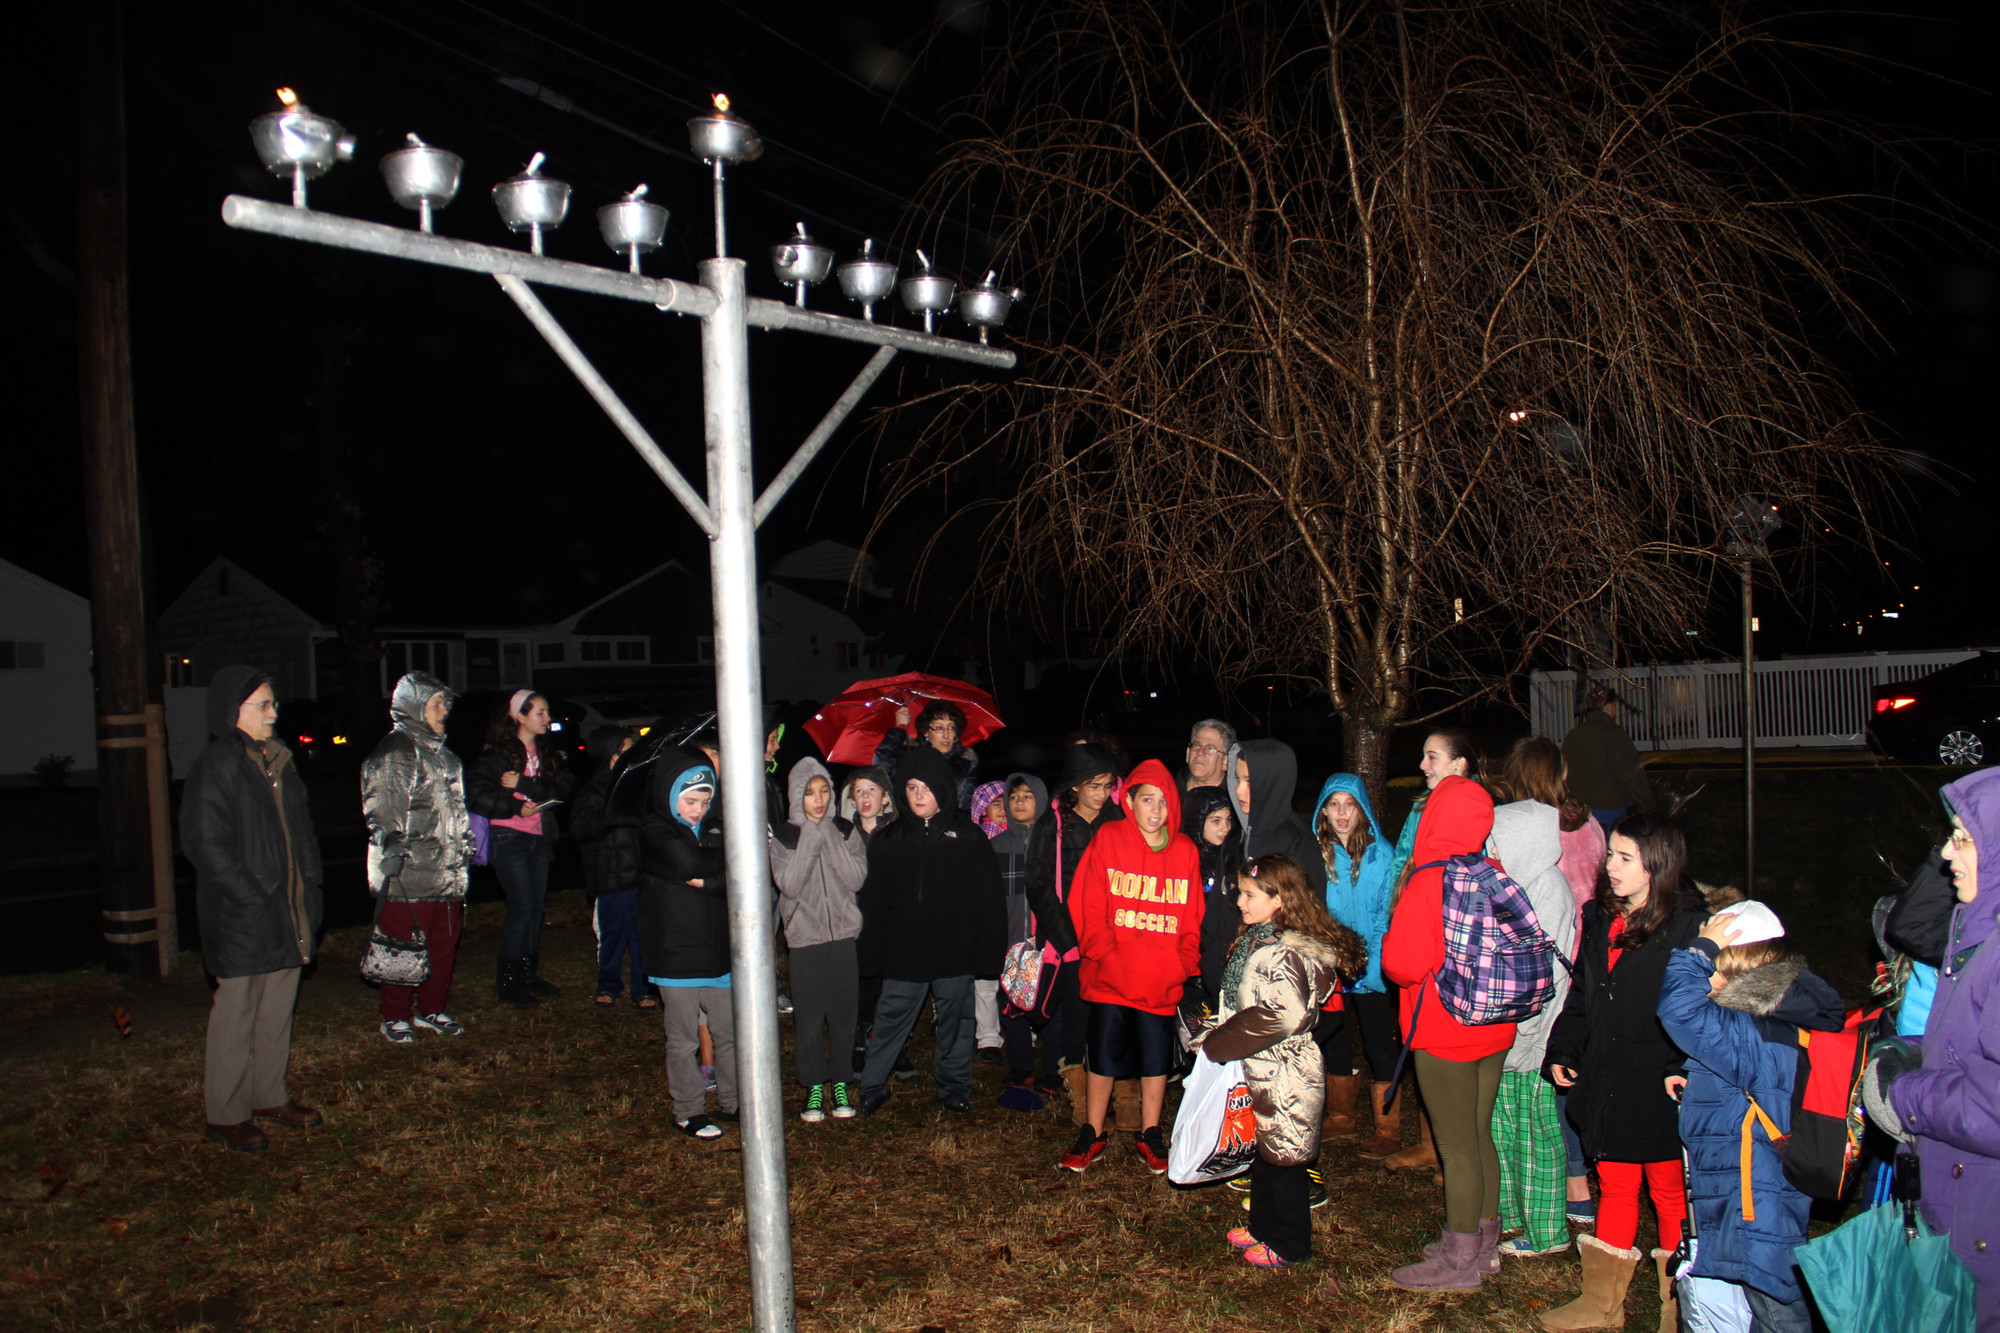 The East Meadow Jewish Center continued its tradition of lighting a giant menorah to signify each night of Hanukkah.